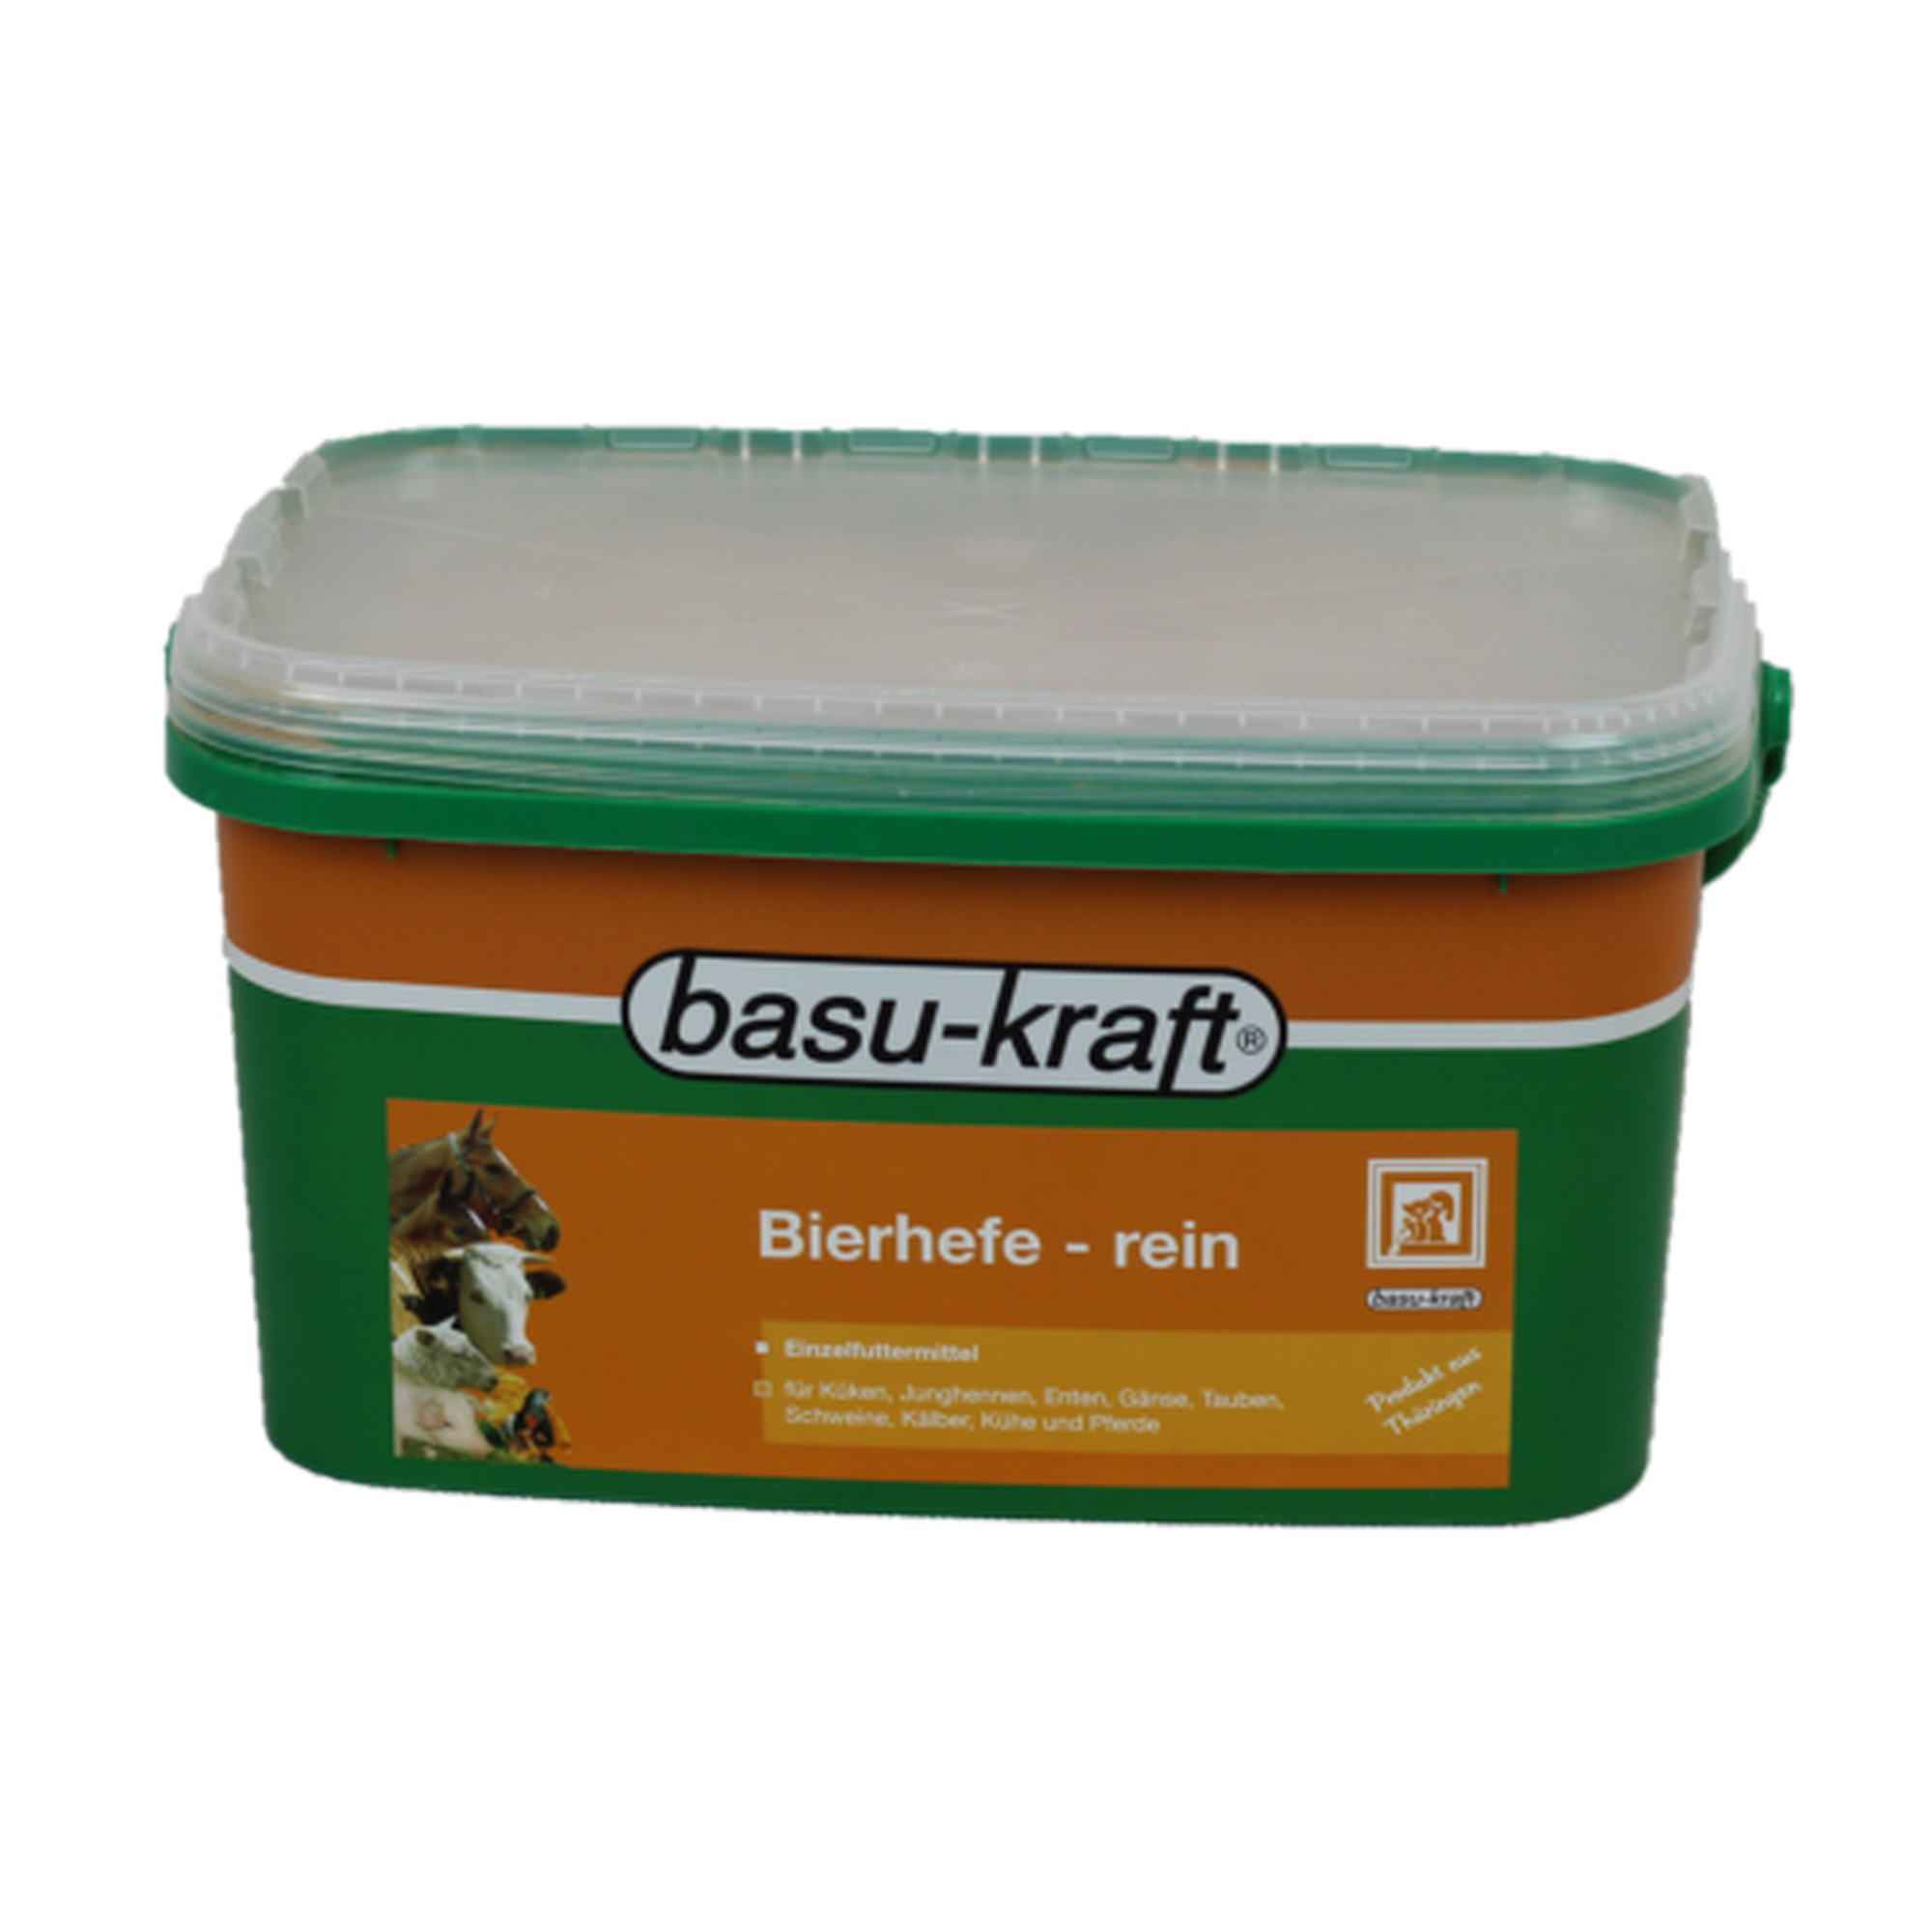 Bierhefe rein 3,5 kg + product picture